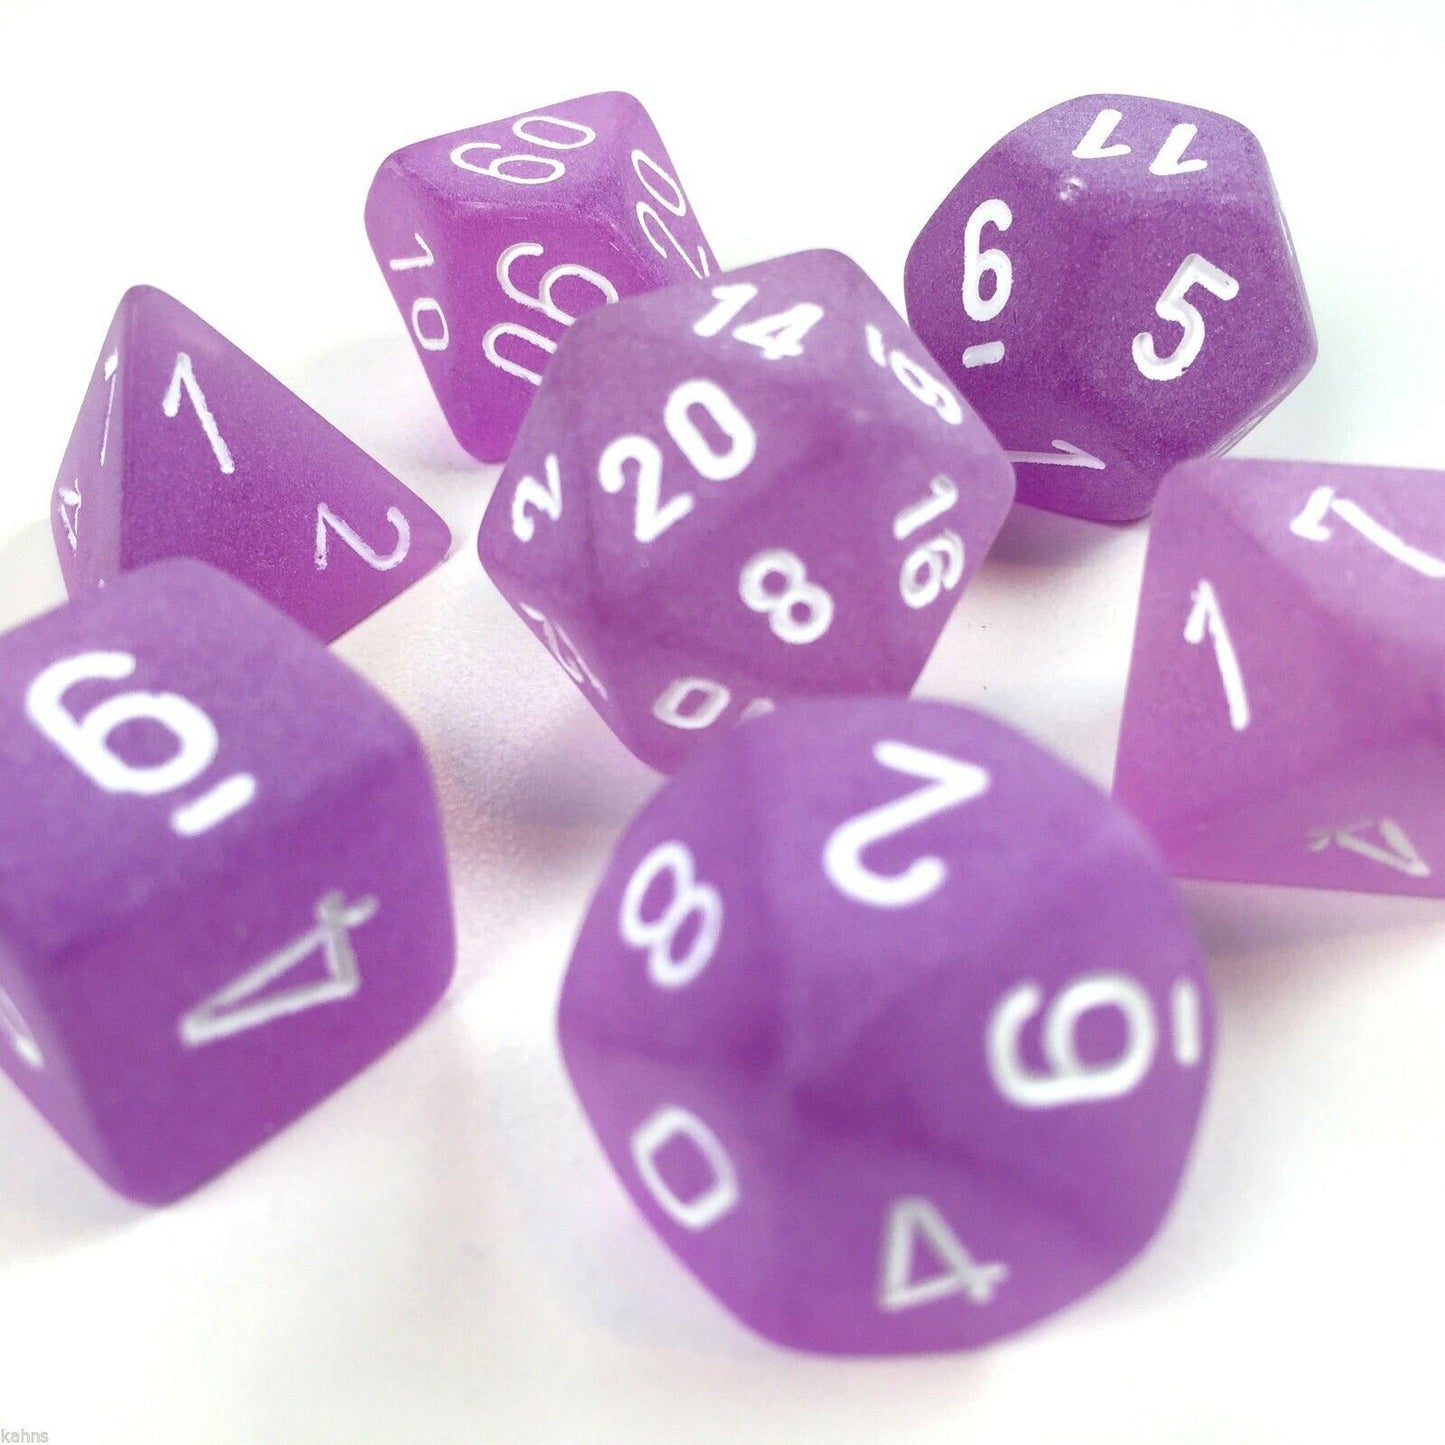 Chessex Dice: 7 Die Set - Frosted - Purple with White (CHX LE430) - Gamescape